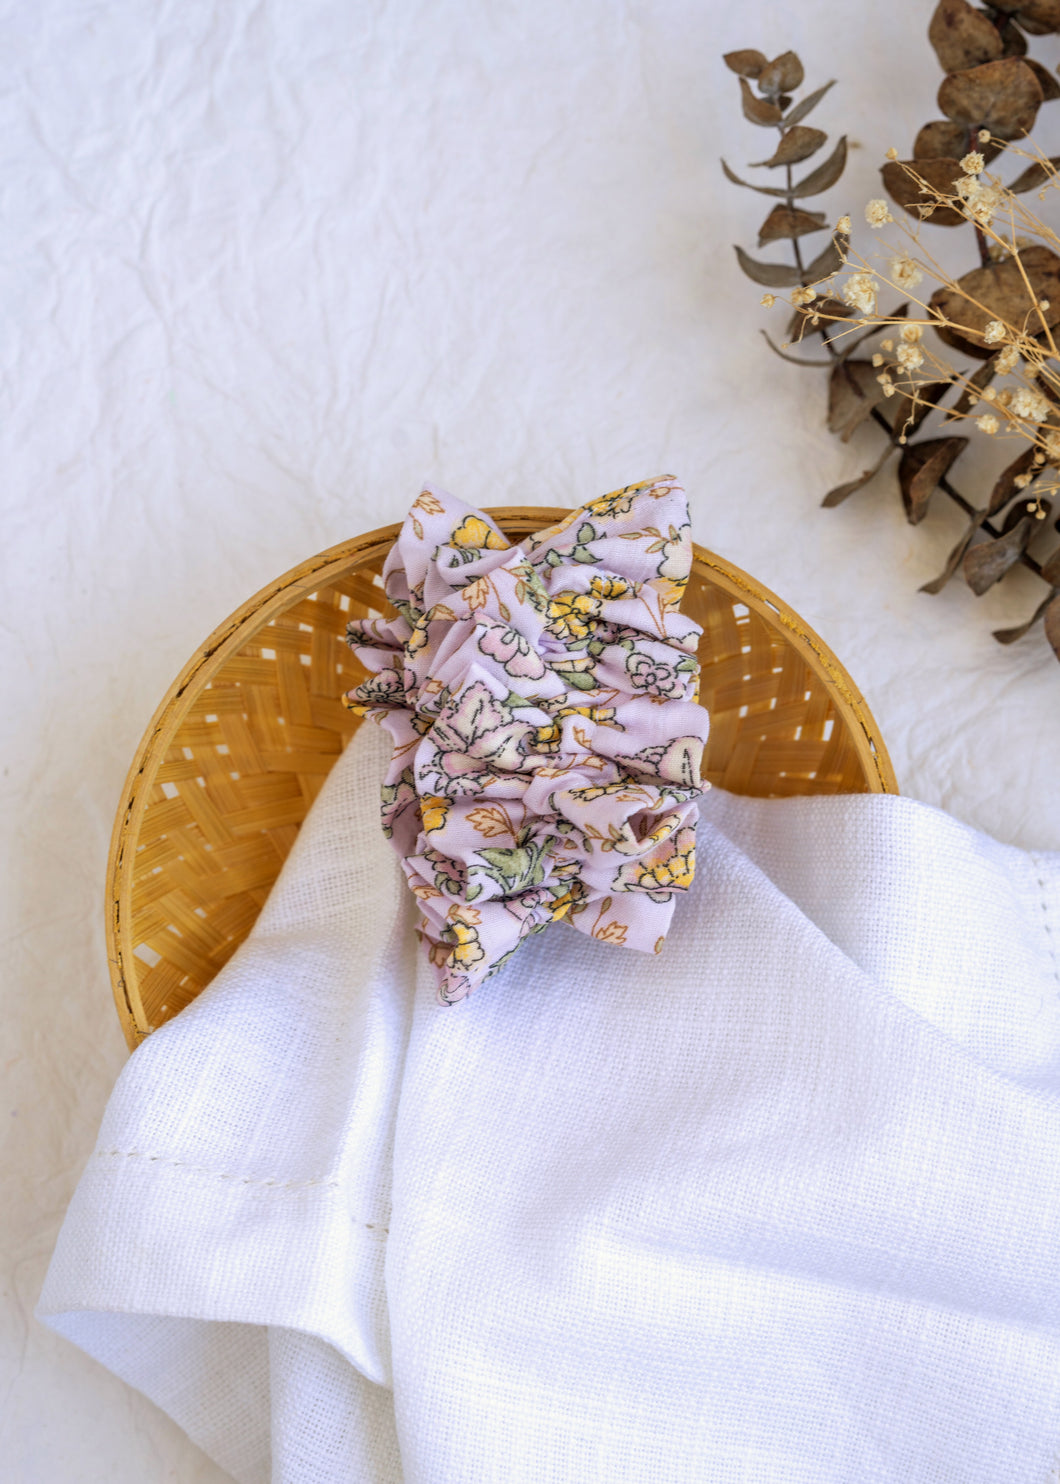 A hair accessory of Lavender Floral Scrunchies placed in a wooden basket with a white cloth beneath, placed on a white background with some leaves and decoratives